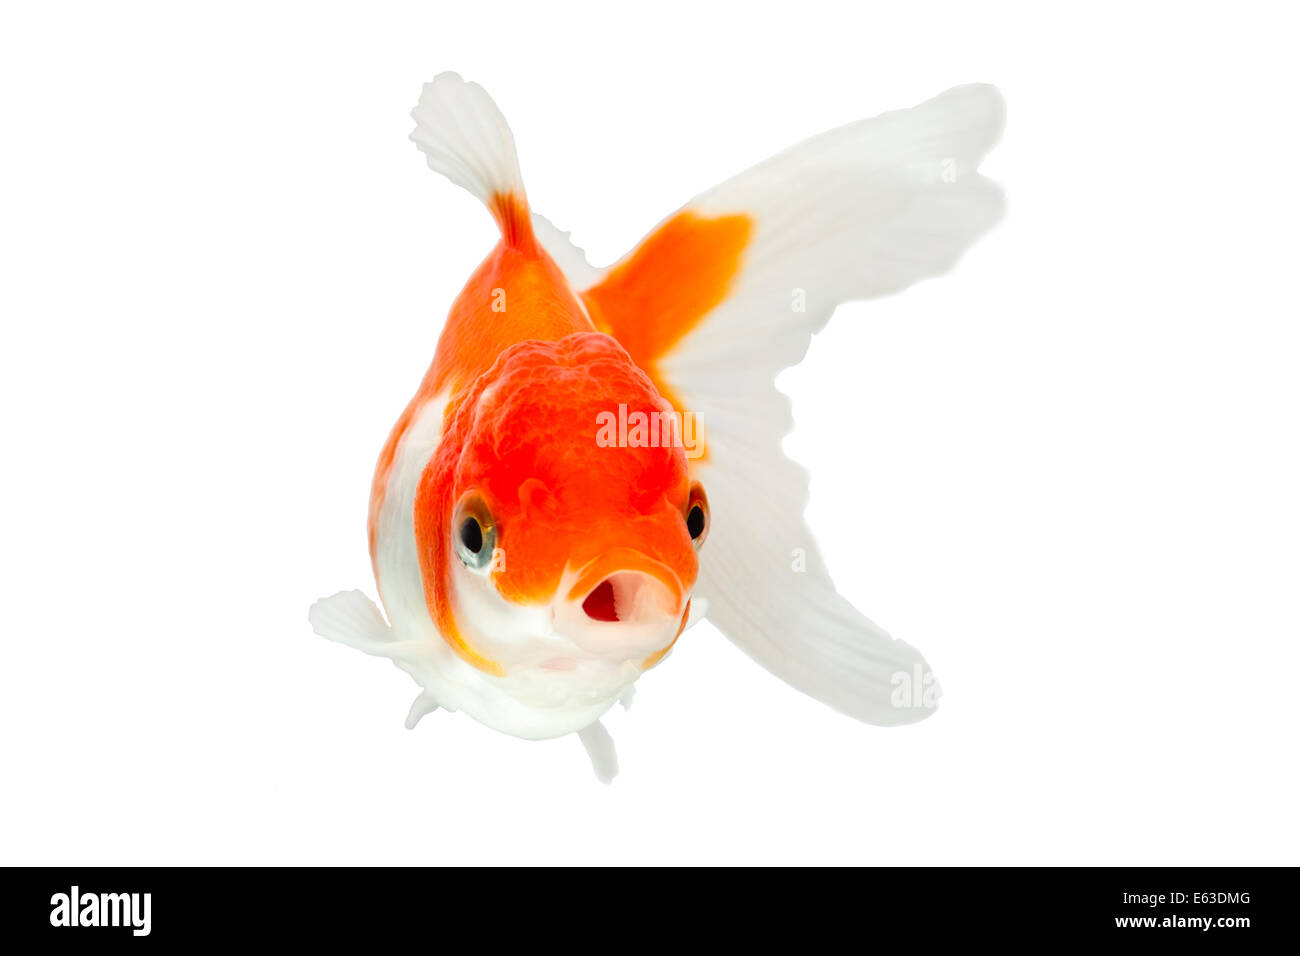 Oranda Goldfish Isolated On White High Quality Studio Shot Manually Removed From Background So The Finnage Is Complete Stock Photo